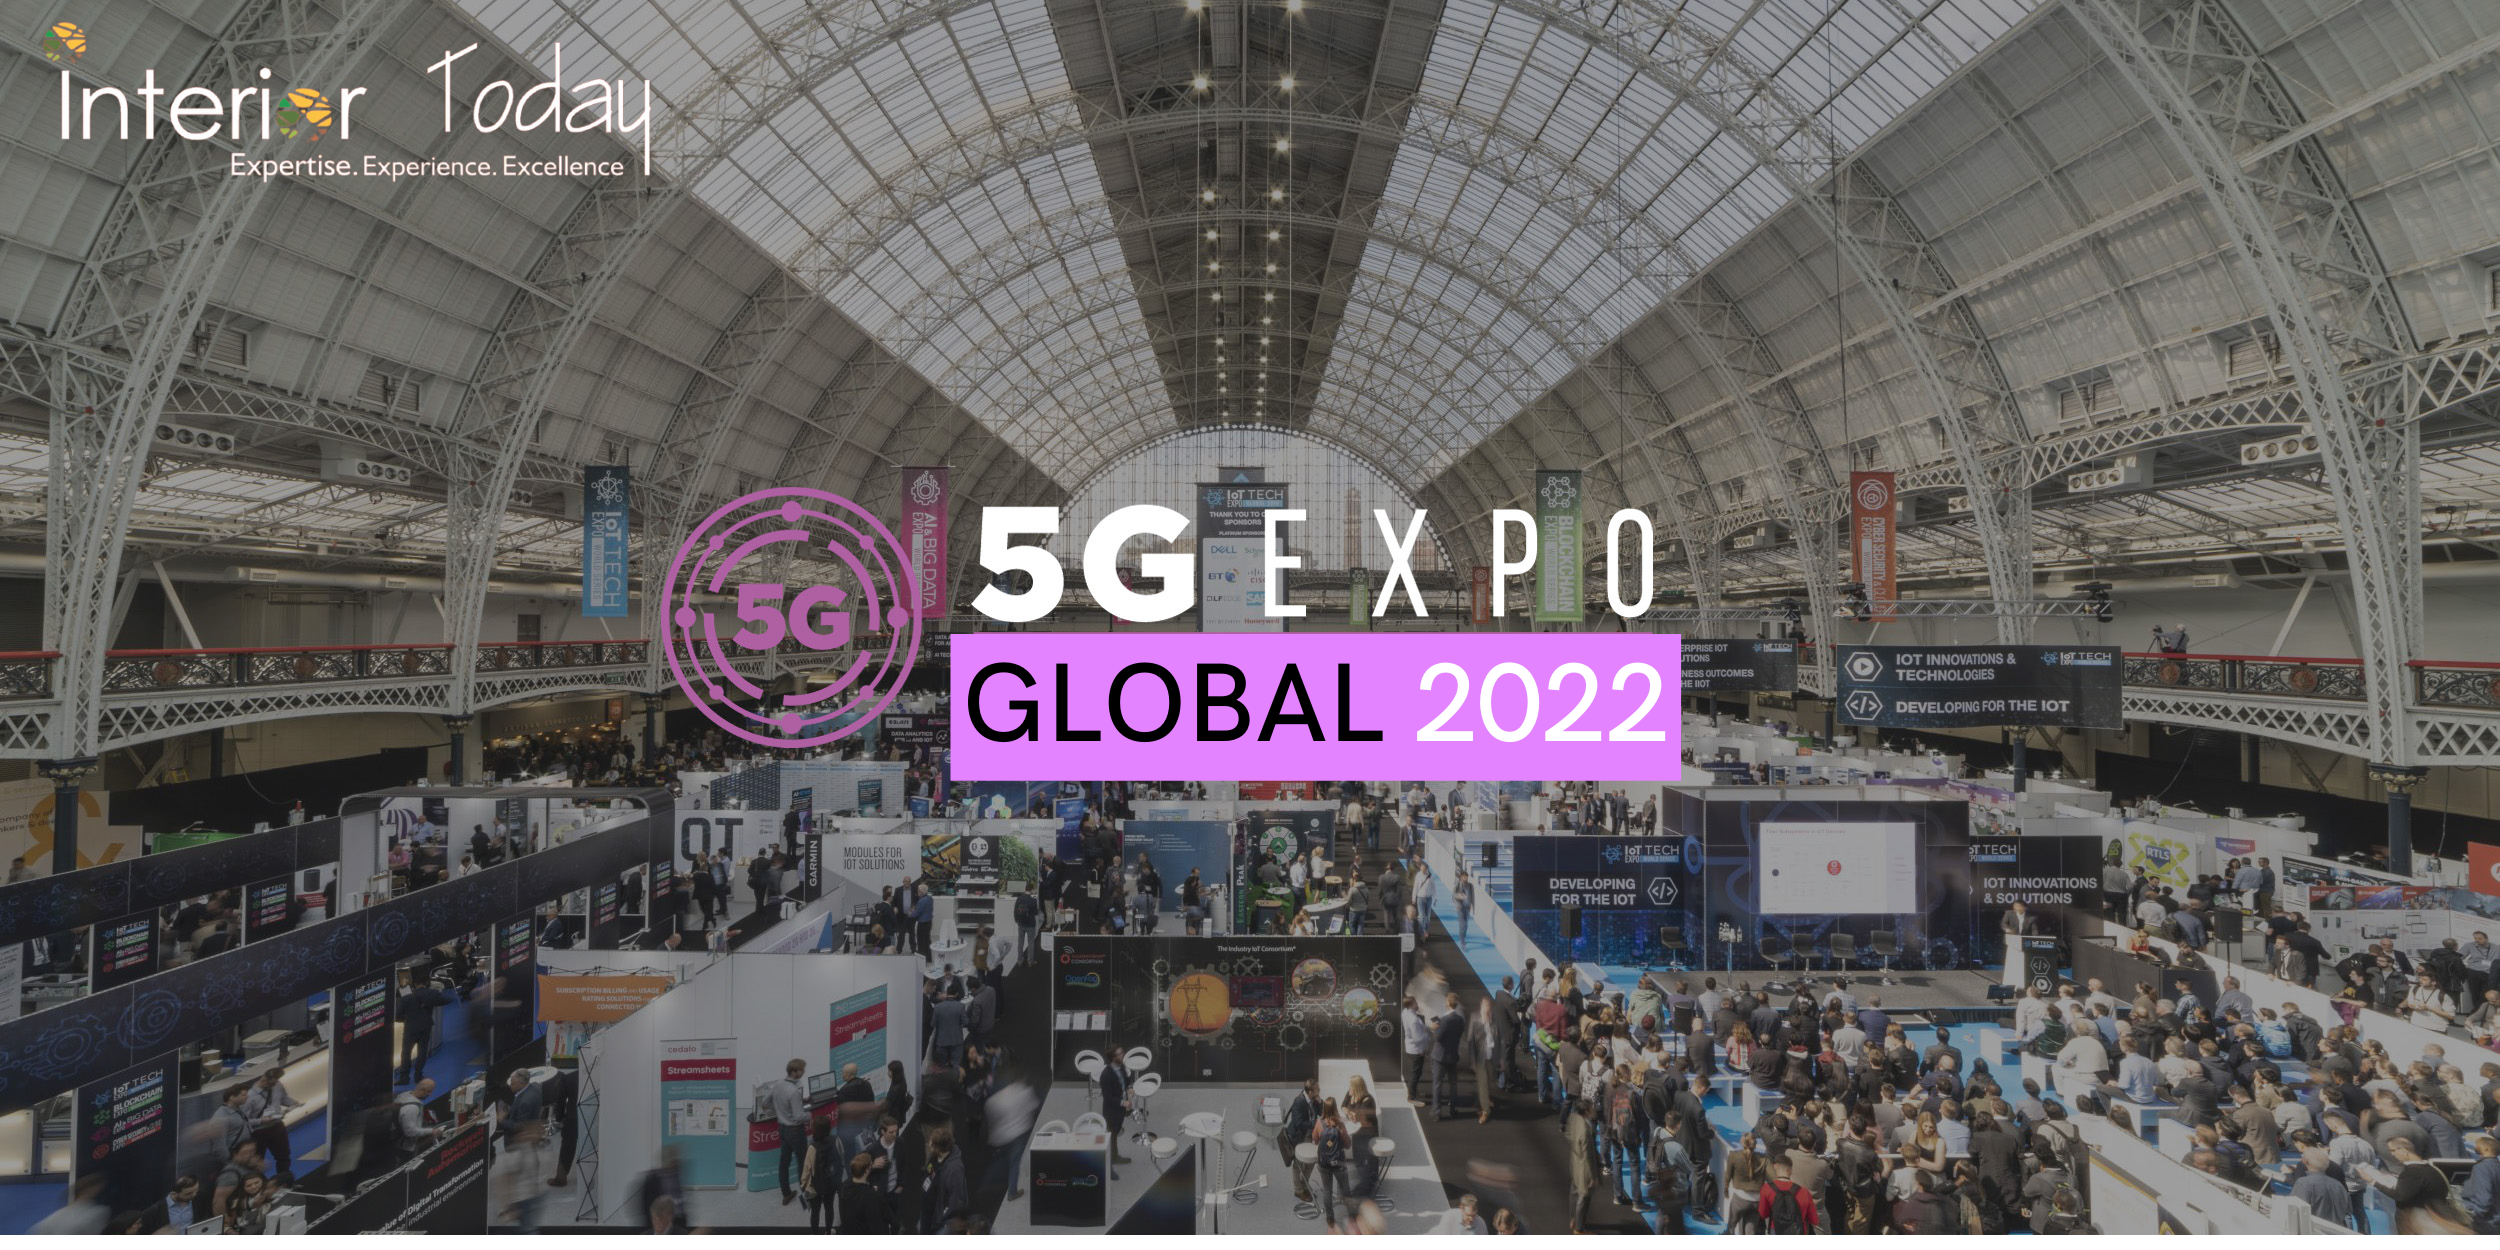 Exhibition Stand Builder In 5G Expo Global 2022